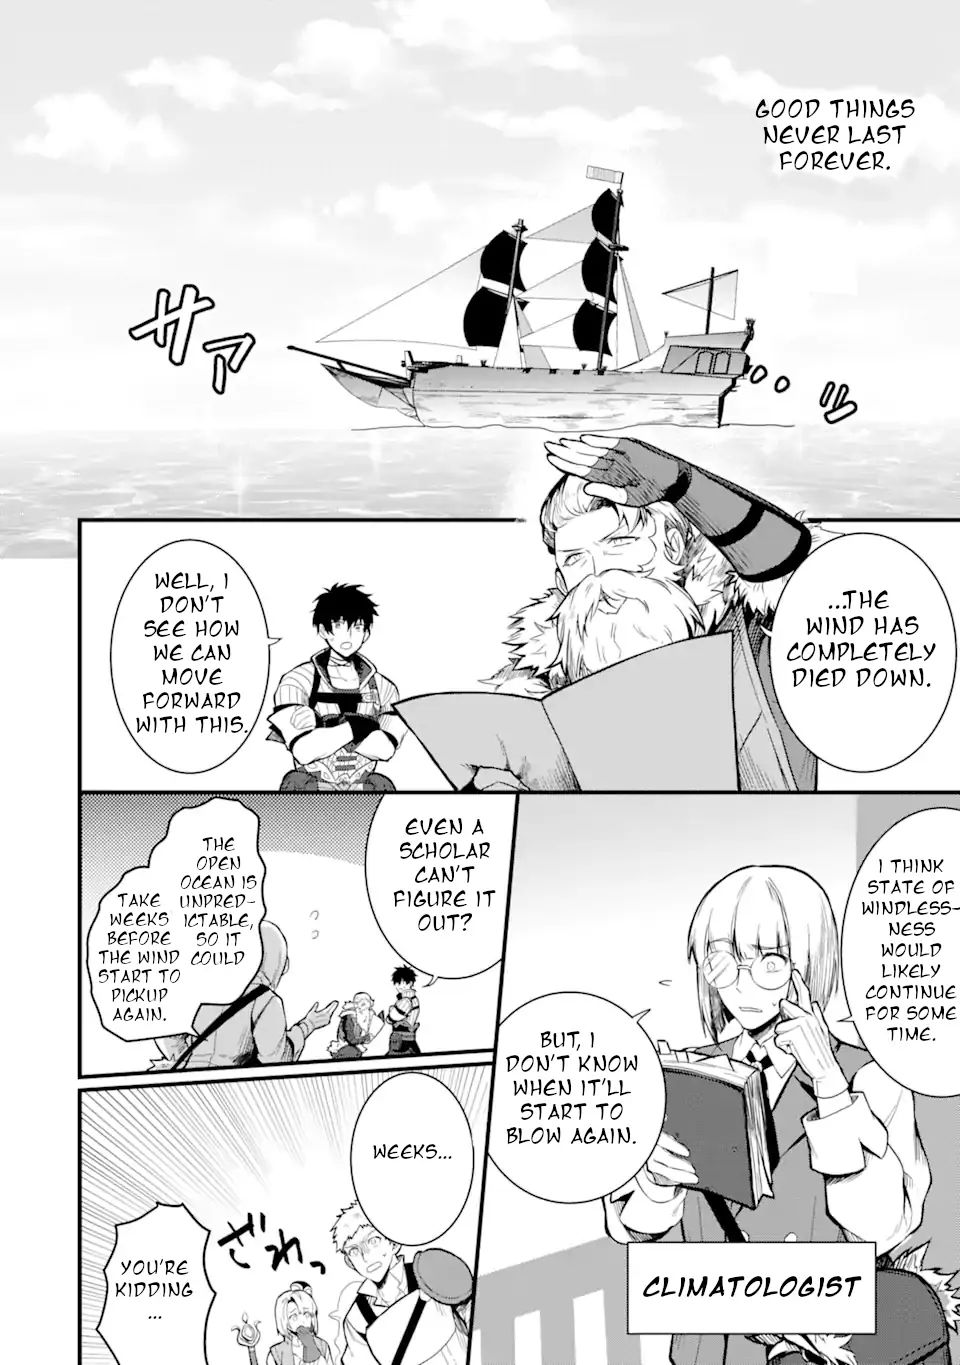 The Strange Dragon and the Former Choreman of the Heroes Party, Relaxing Slow Life on the New Continent - chapter 1.3 - #4